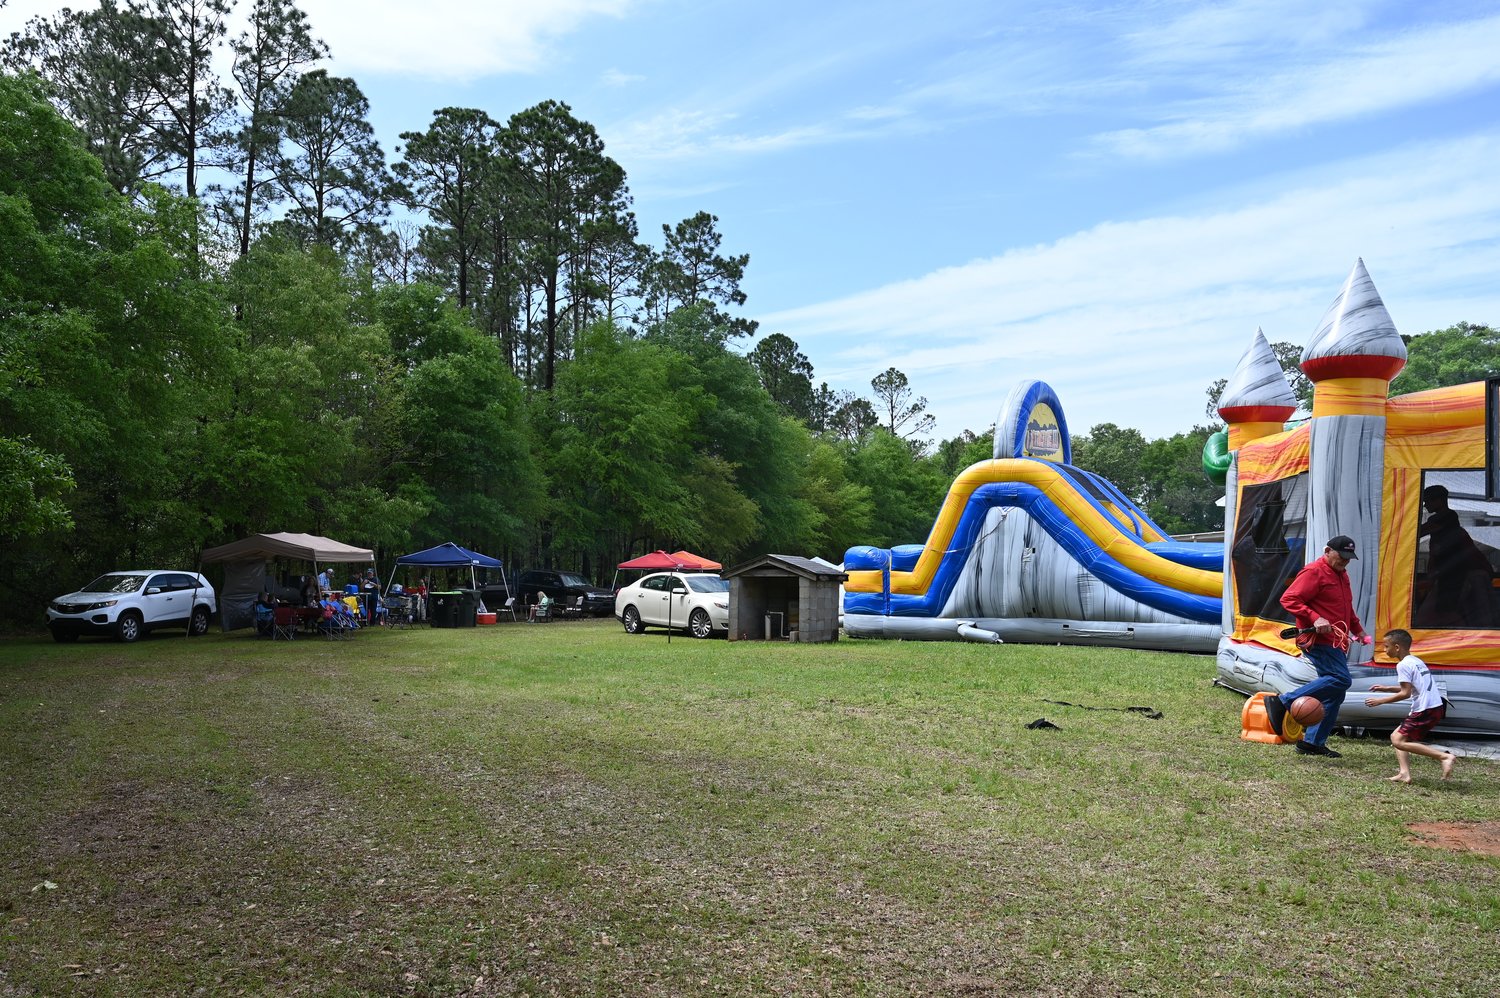 Inflatables keep kids busy while parents cook and eat at the Holy Smoke Christian Barbecue Competition in Preston, Ga. on Saturday, April 1, 2023. (Index/Roger Alford)